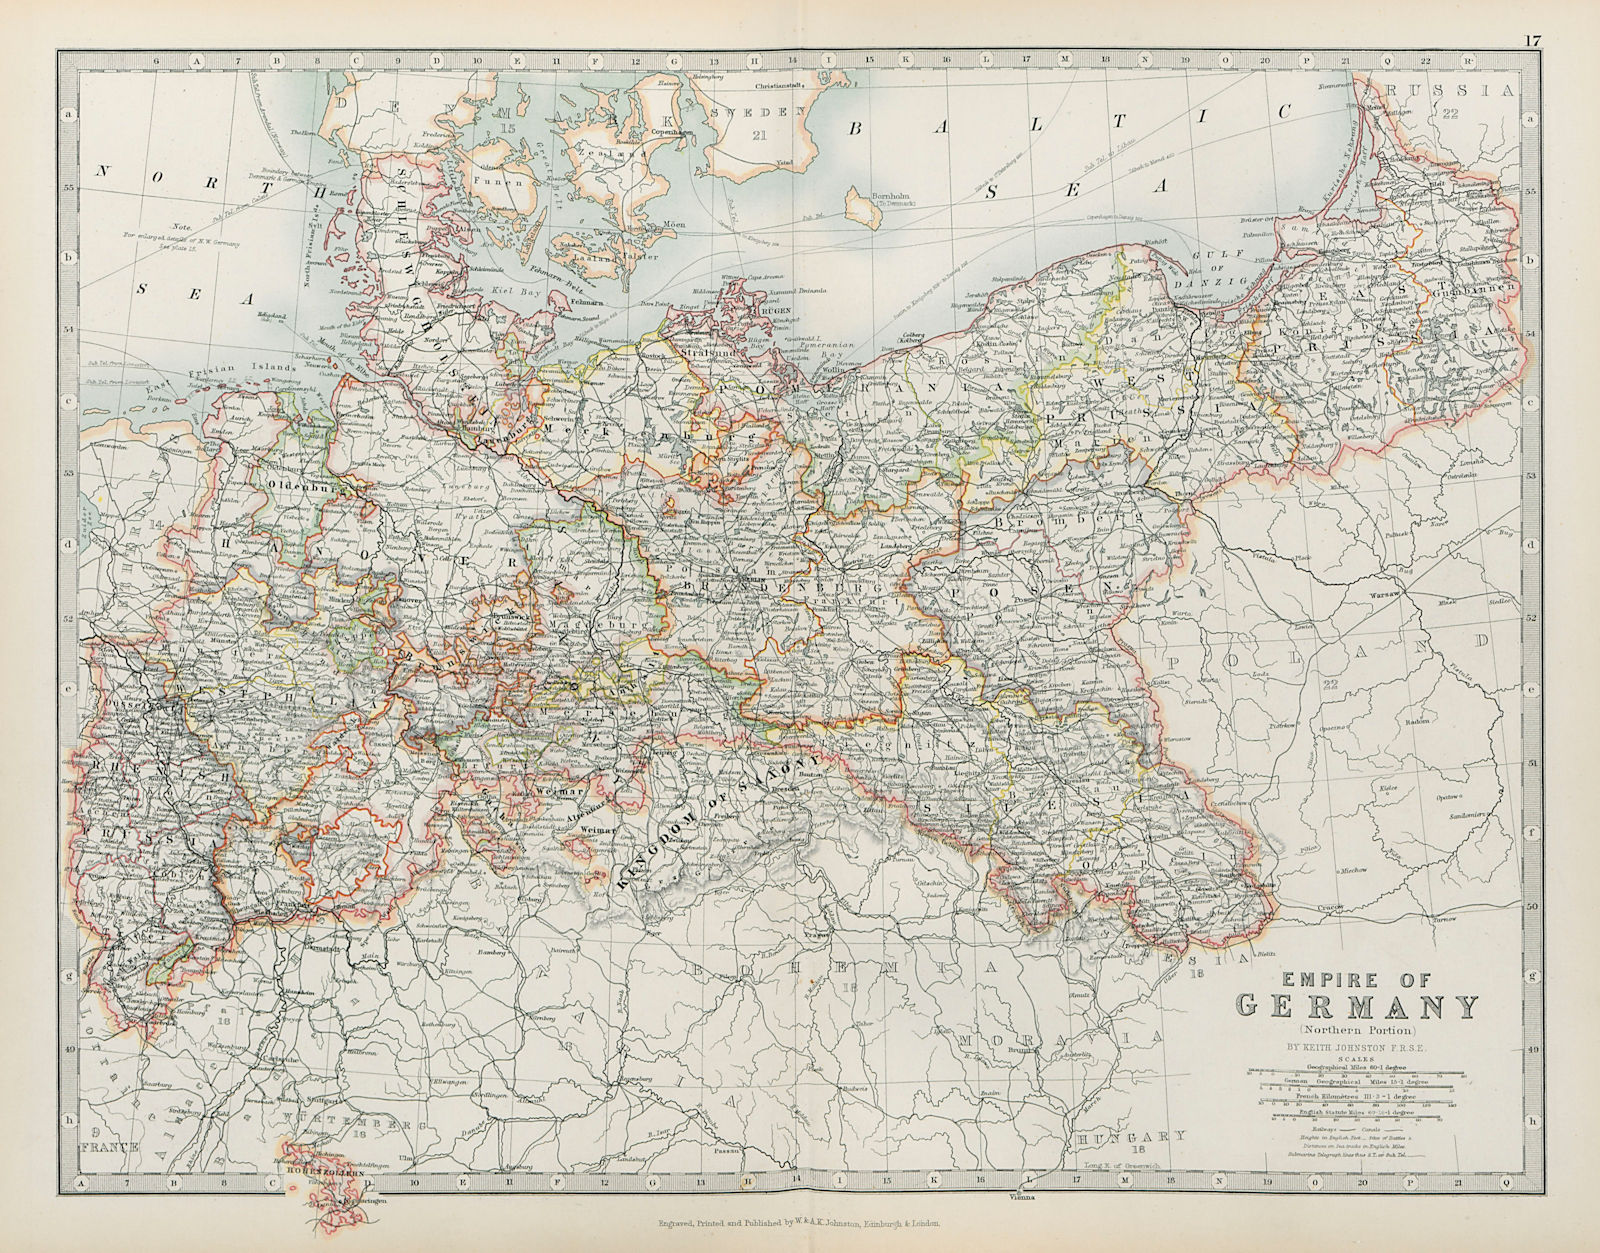 Associate Product GERMAN EMPIRE NORTH Prussia Poland &c Railways Canals JOHNSTON 1901 old map